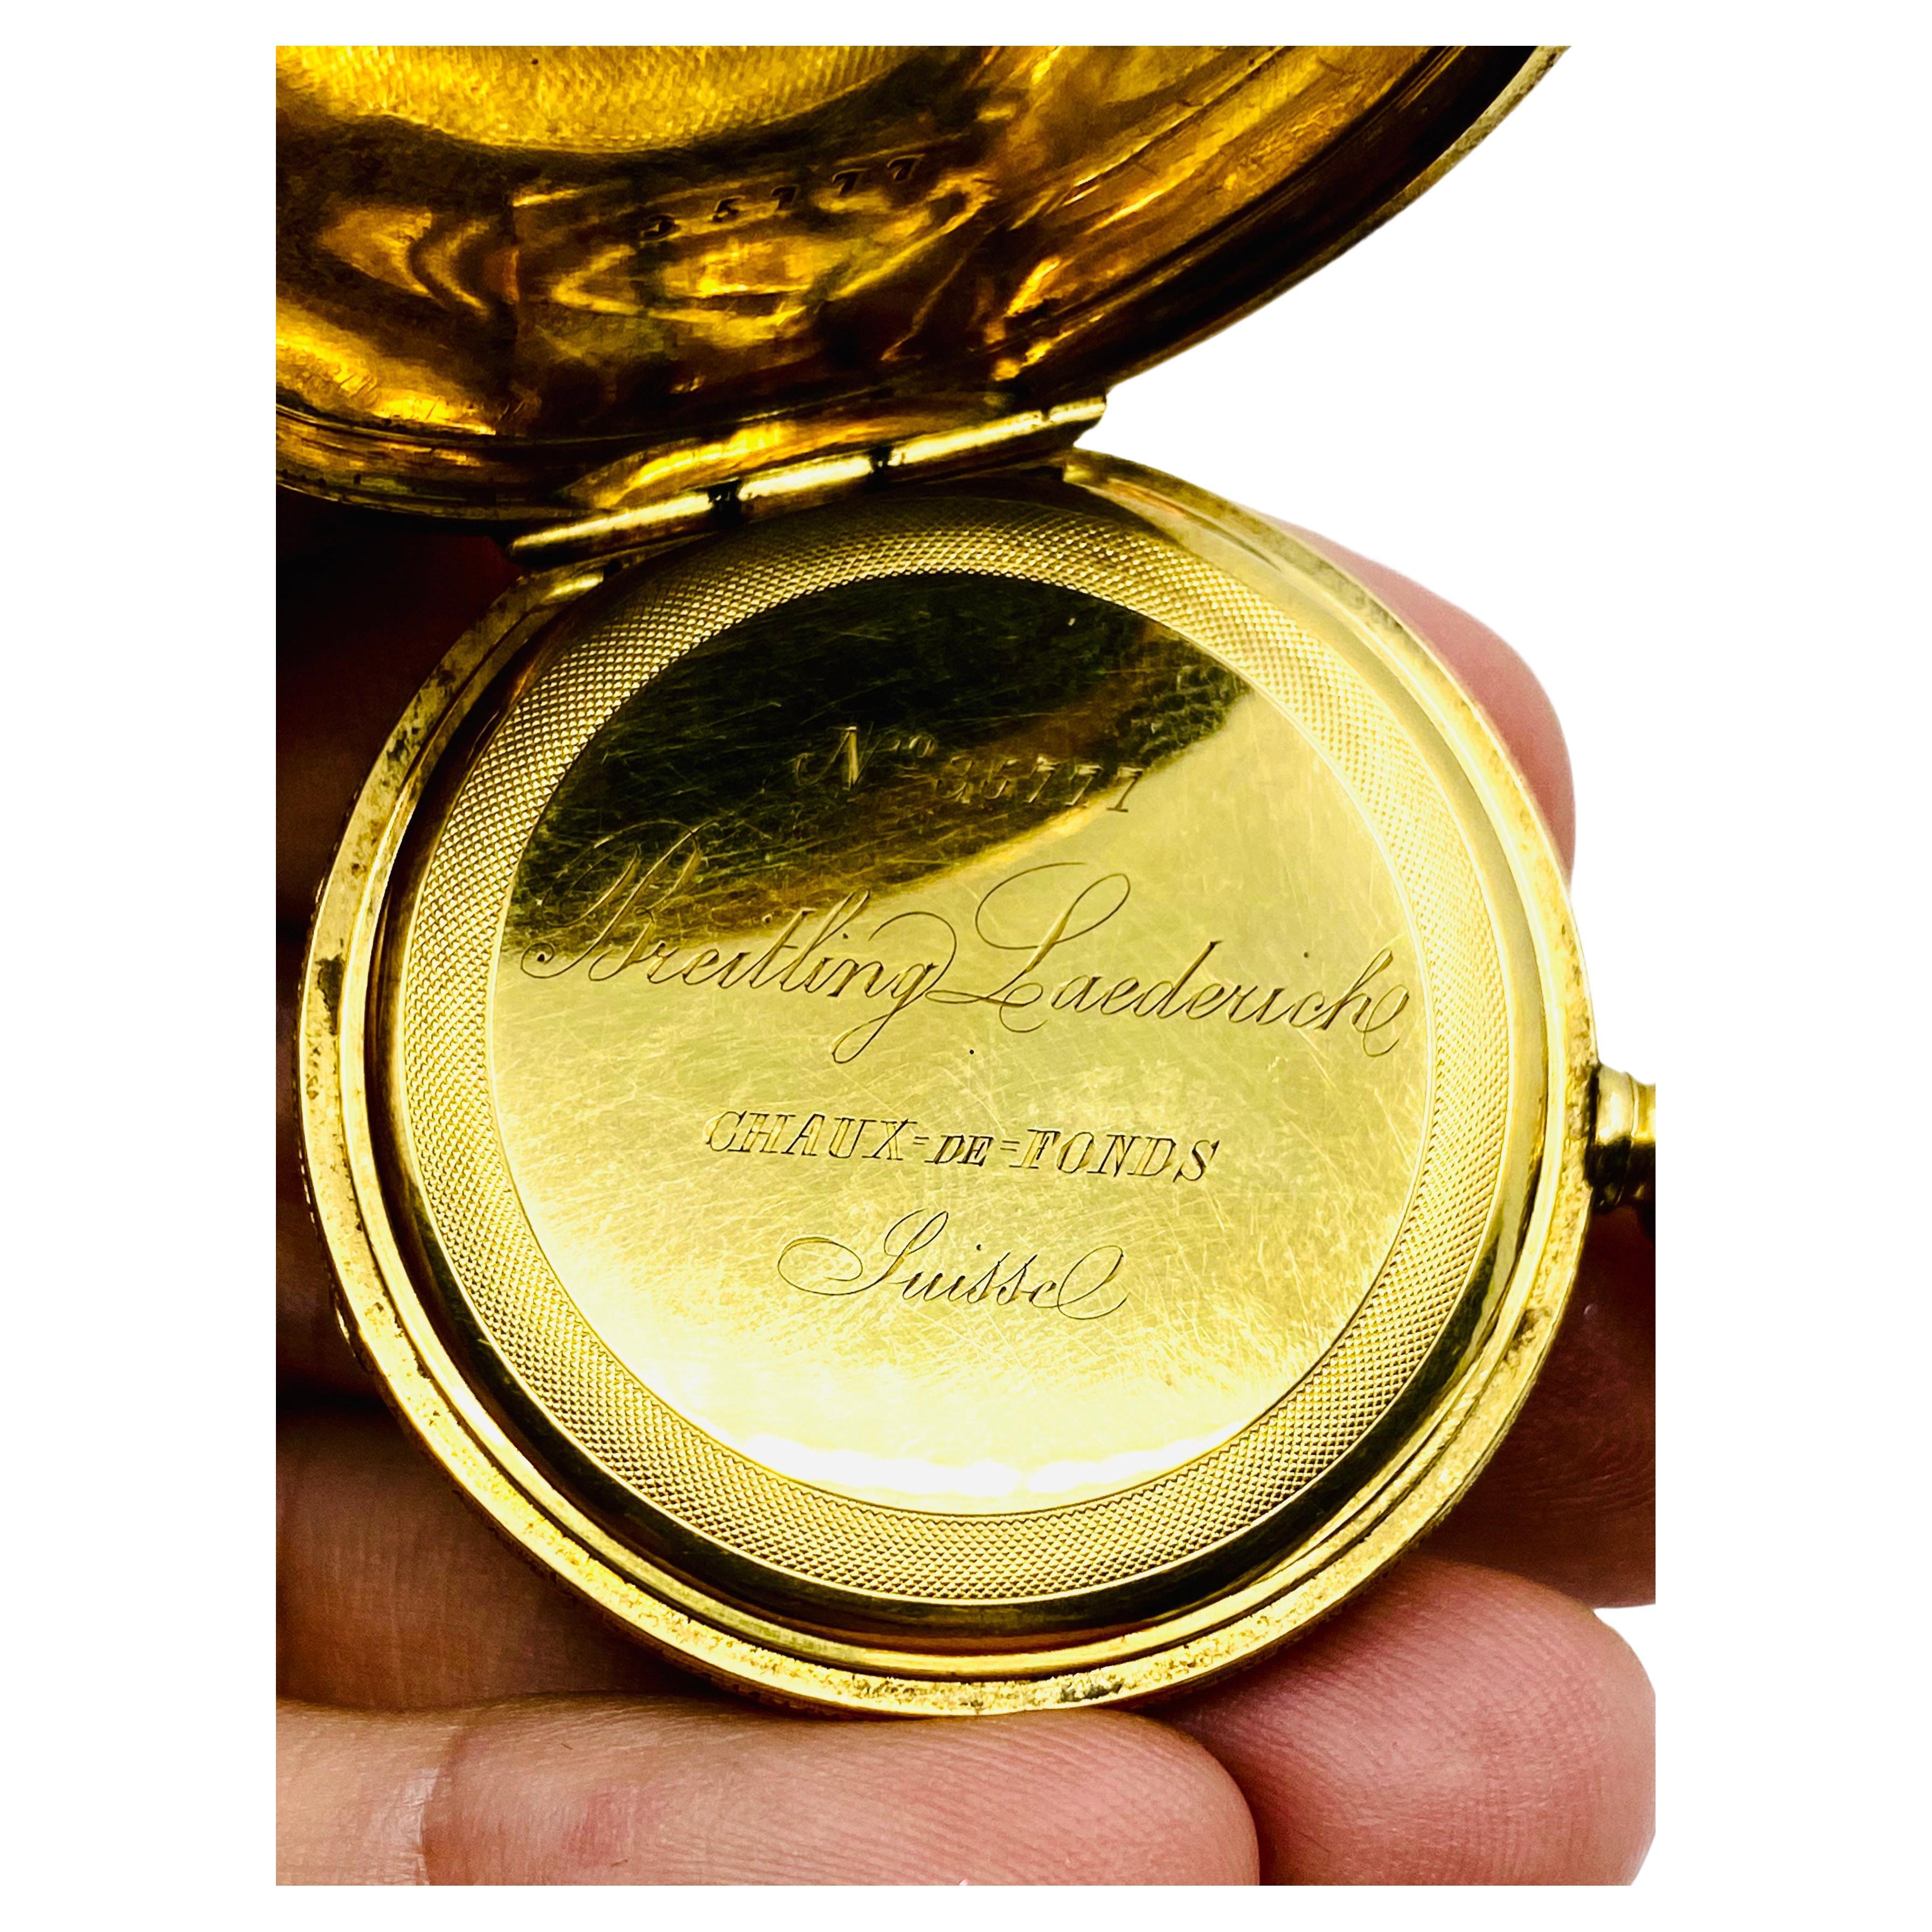 Breitling Laederich Antique Pocket Watch 18k Gold Enamel In Excellent Condition For Sale In Beverly Hills, CA